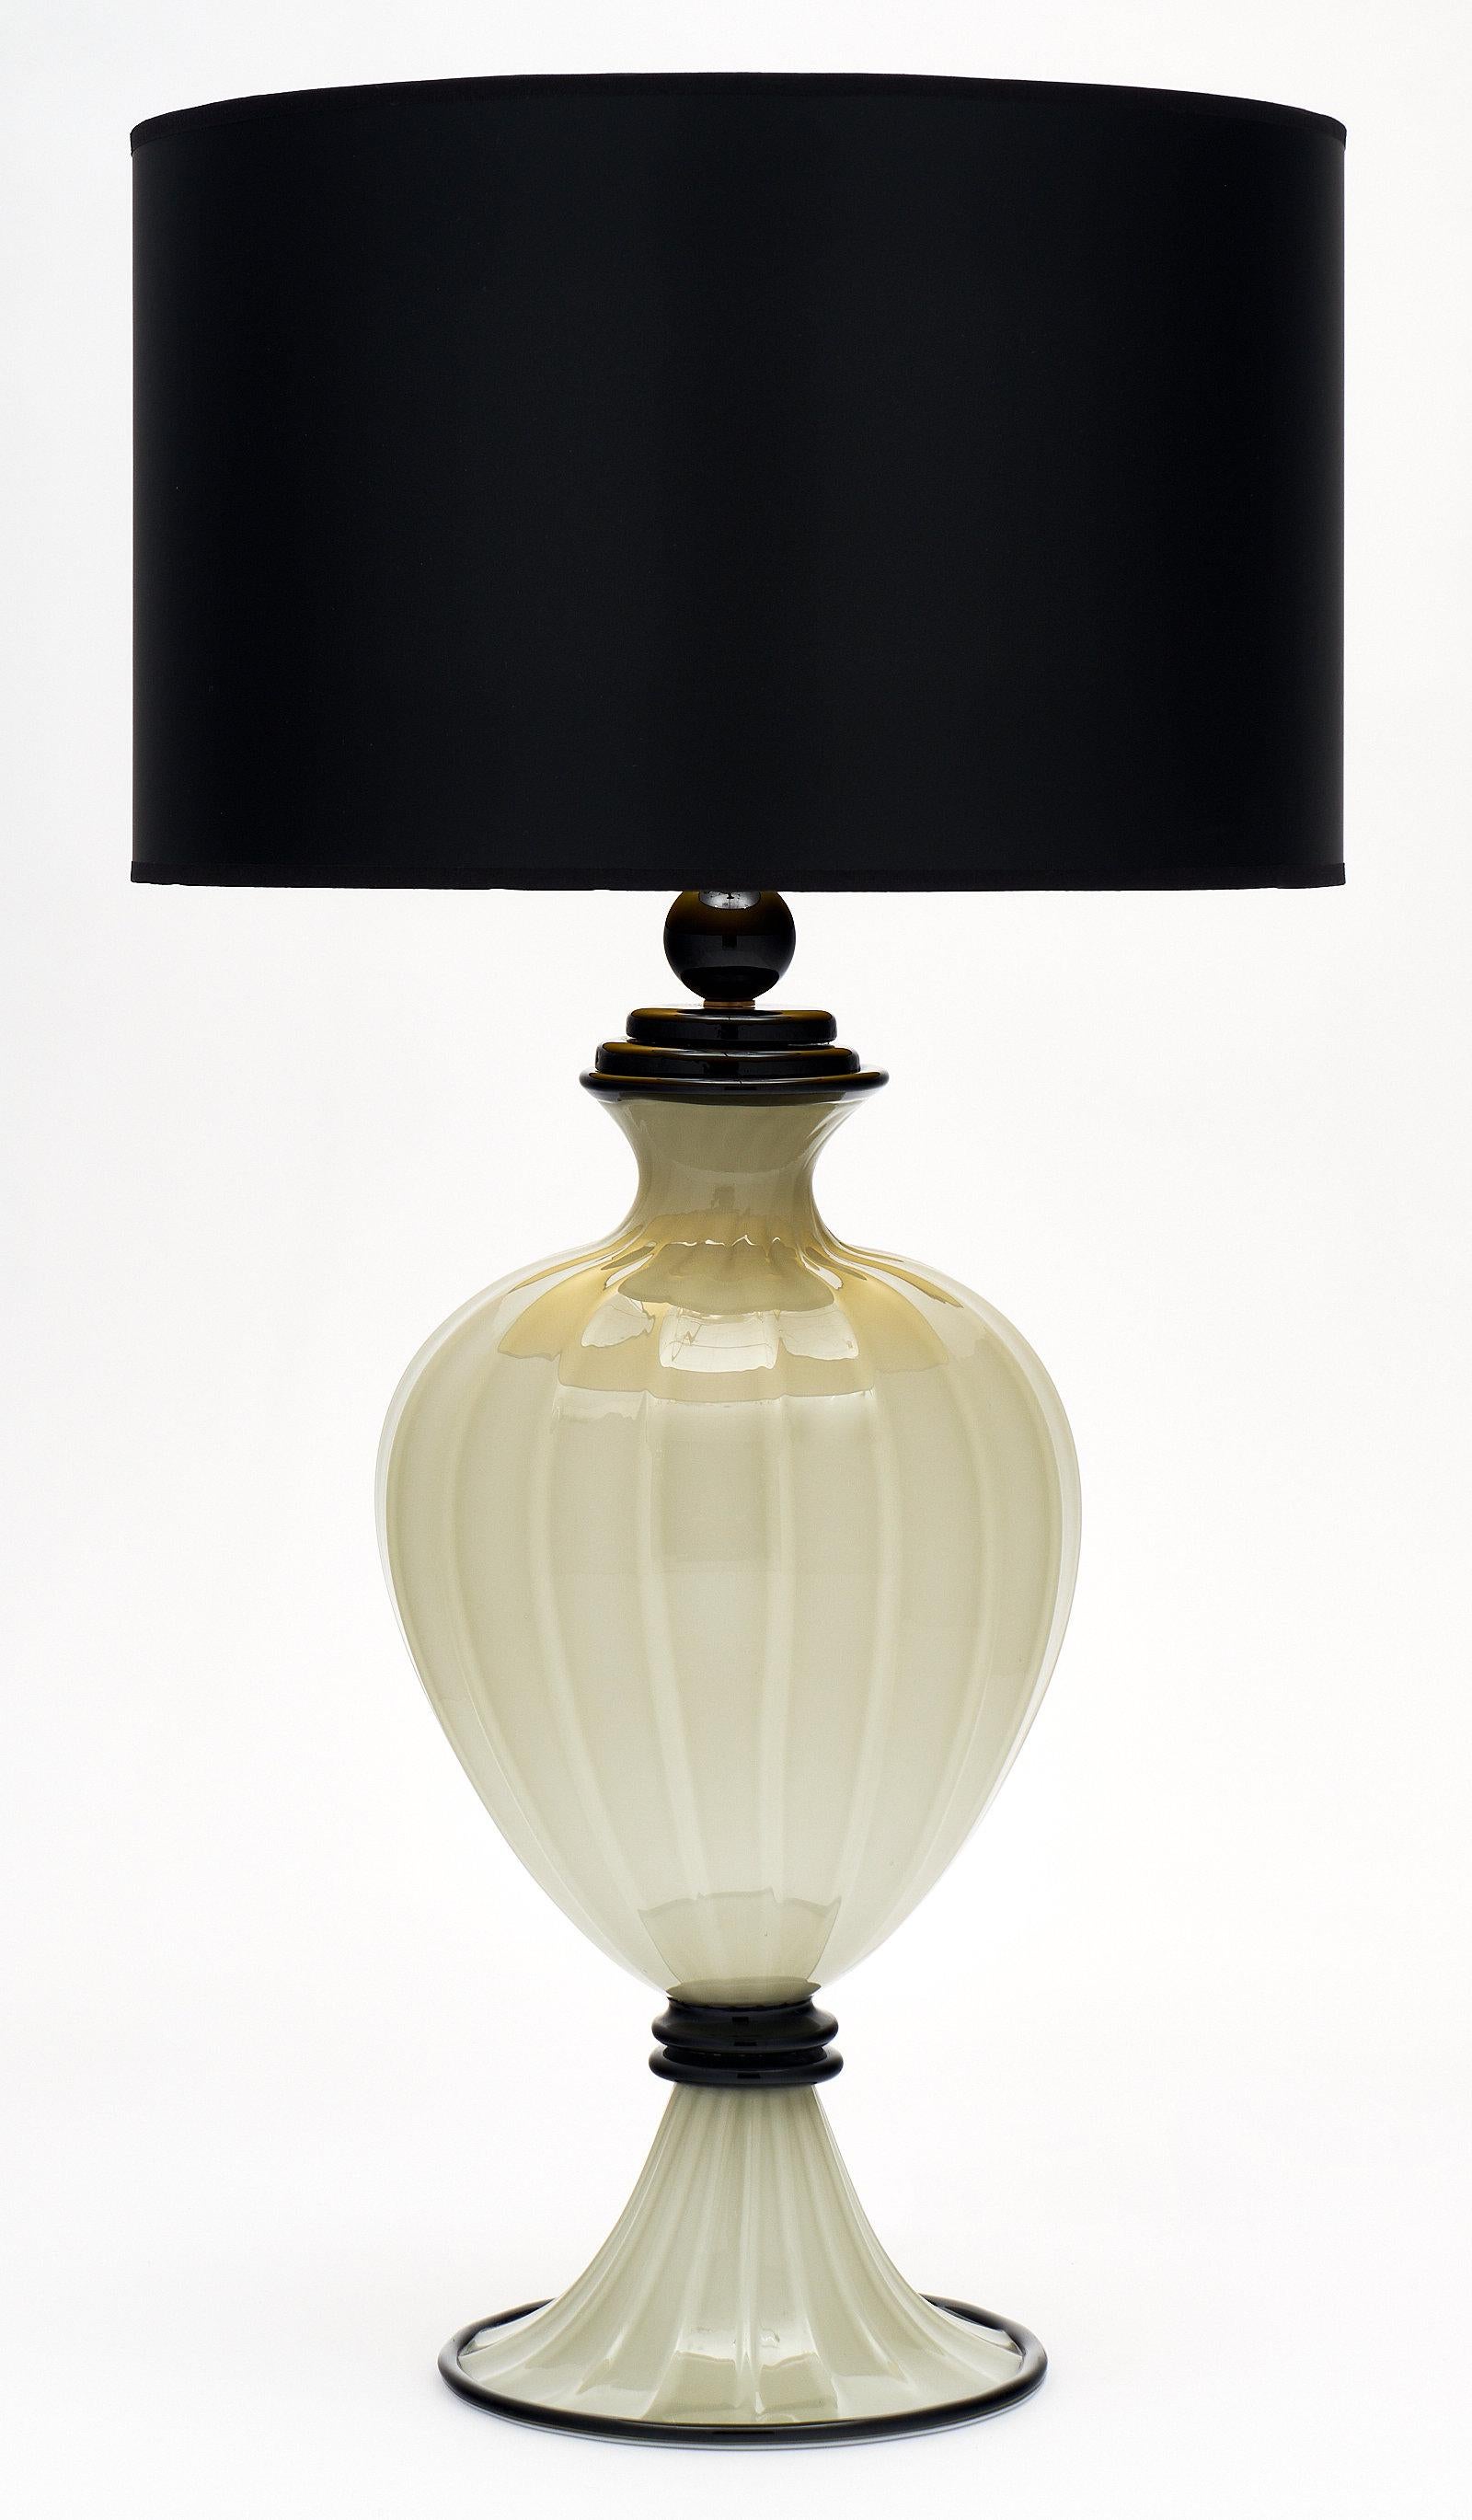 A unique pair of gray and black Murano glass lamps. This hand-blown pair combines gray glass with black details. They have been newly wired to fit US standards.